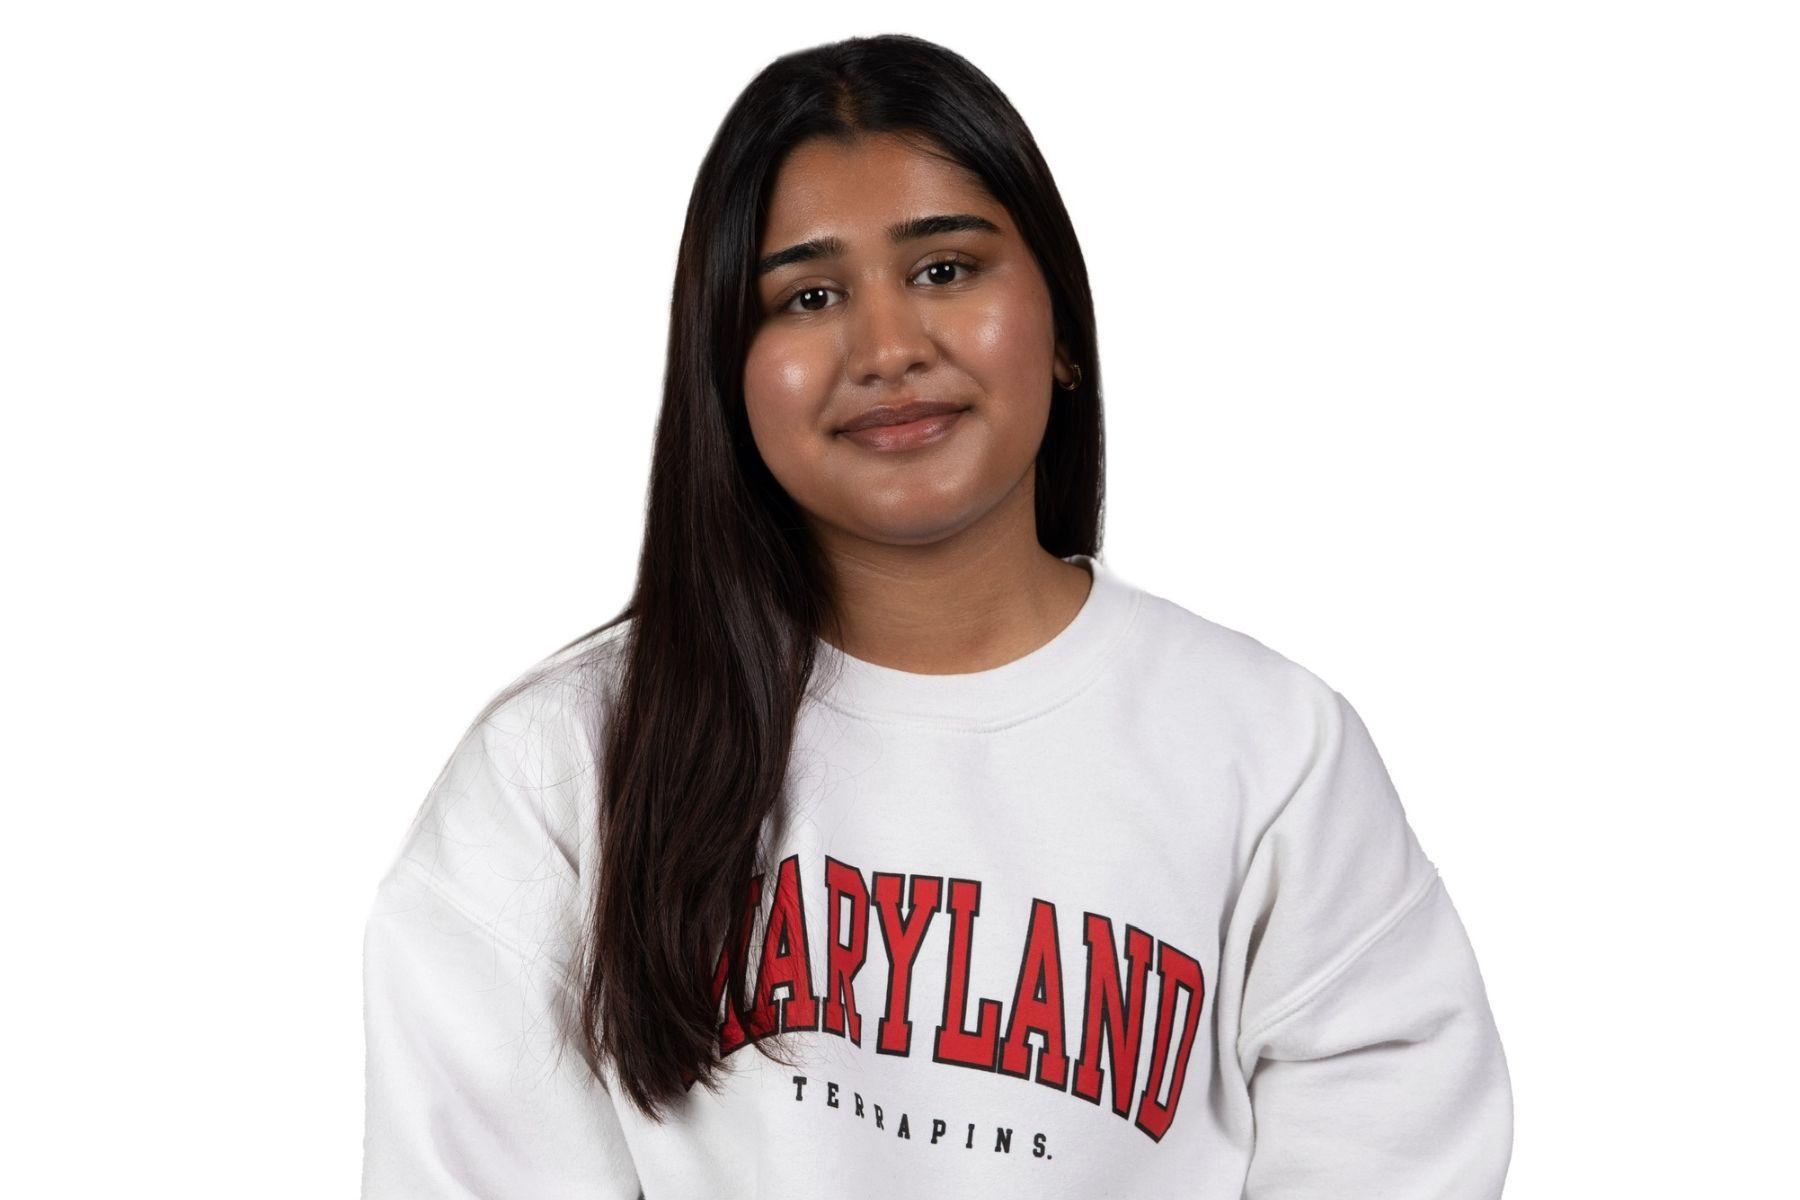 Preethi is wearing a white Maryland sweatshirt and is smiling at the camera